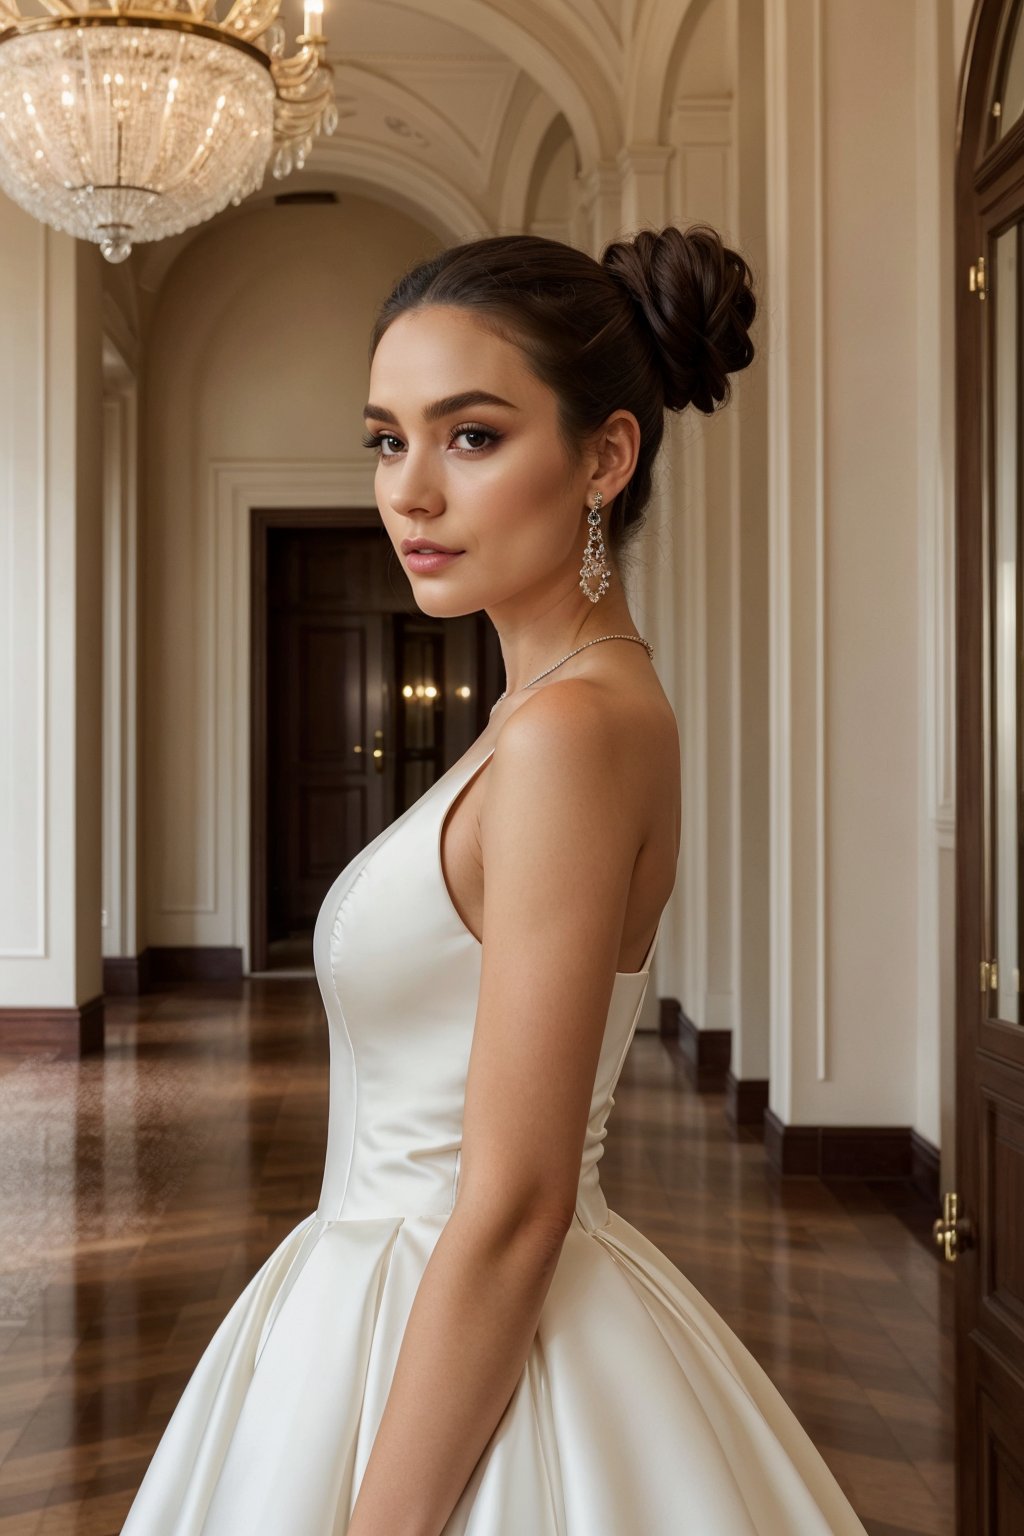 A girl in a modern, elegant ball gown, styled with a sleek updo and minimalist jewelry. She should have a confident, regal expression. The background is a luxurious modern palace, with clean lines, high ceilings, and extravagant chandeliers. The photo should be shot in high definition, with a sharp focus on the subject and a soft, blurred background for a captivating portrait